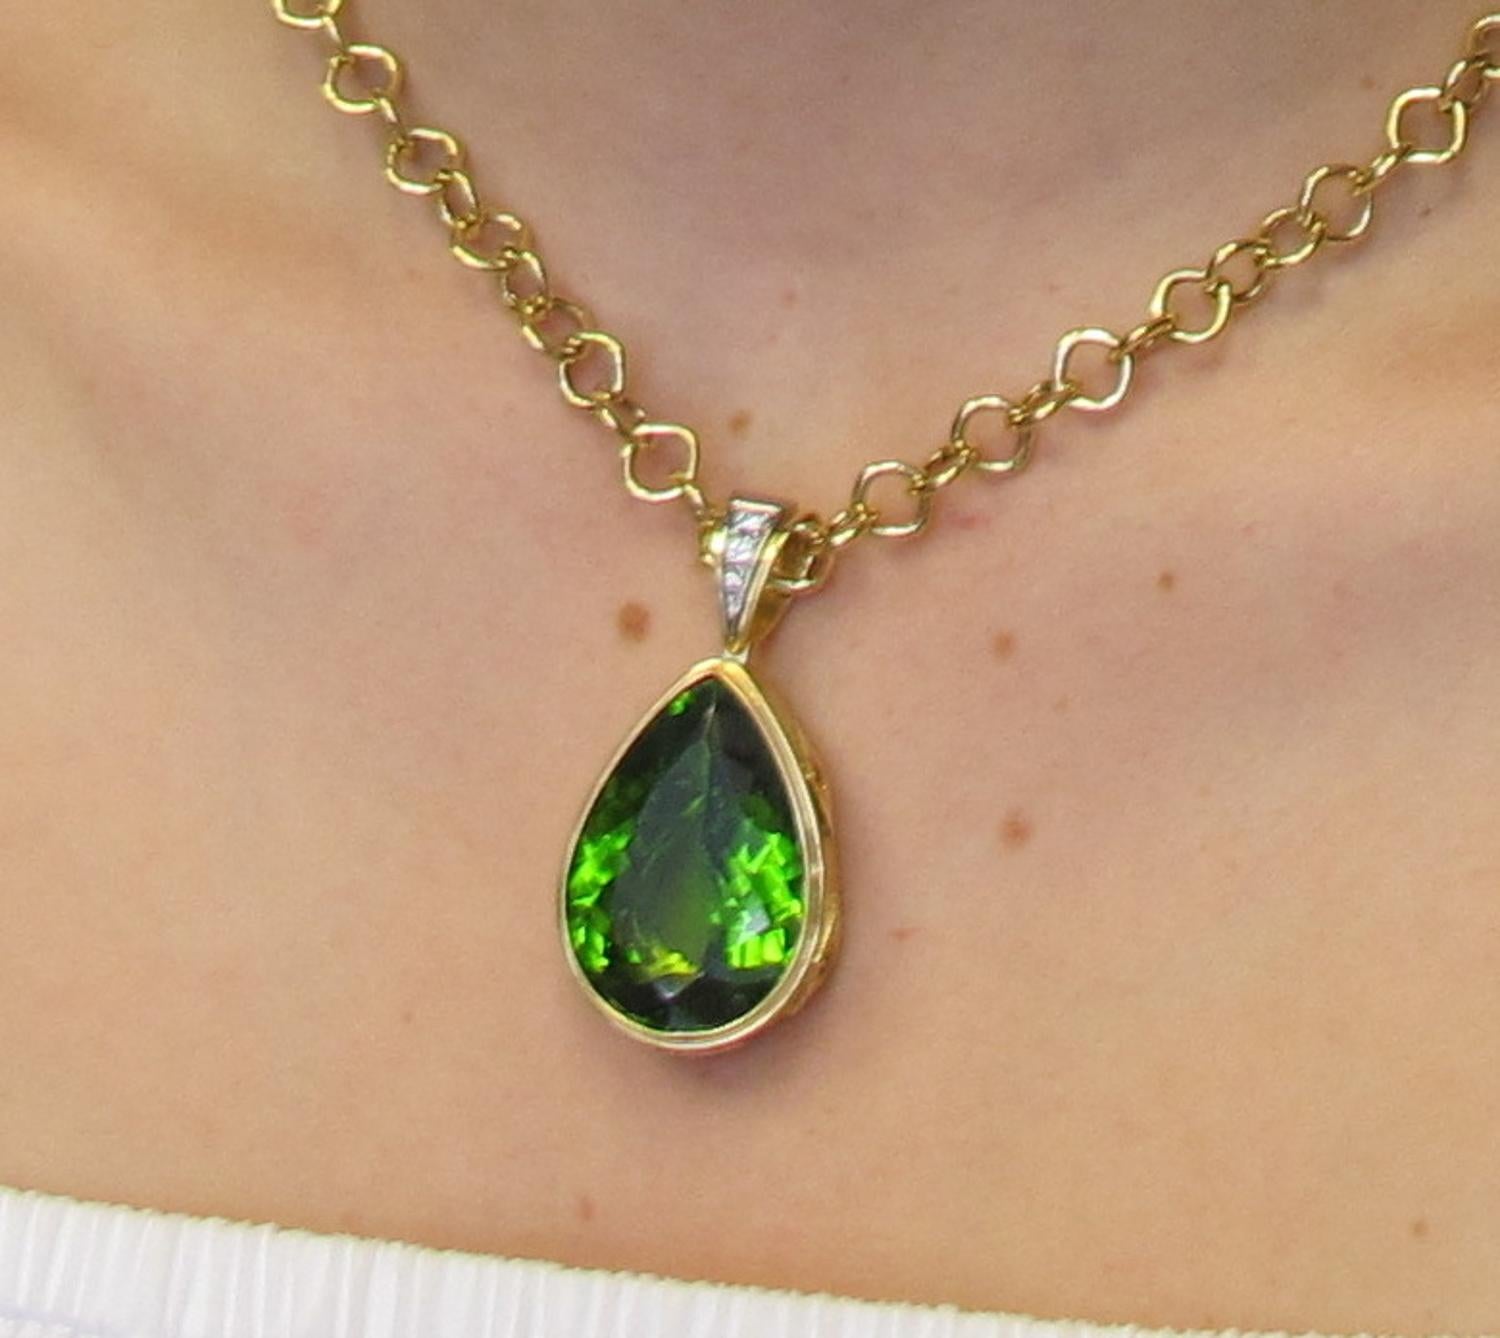 This exquisite pendant will demand attention whenever it's worn! It is comprised of a pear shaped peridot measuring 20x30mm and weighing 42.90 carats, set with 5 round yellow sapphires (0.89 carats total weight), and 3 round brilliant cut diamonds